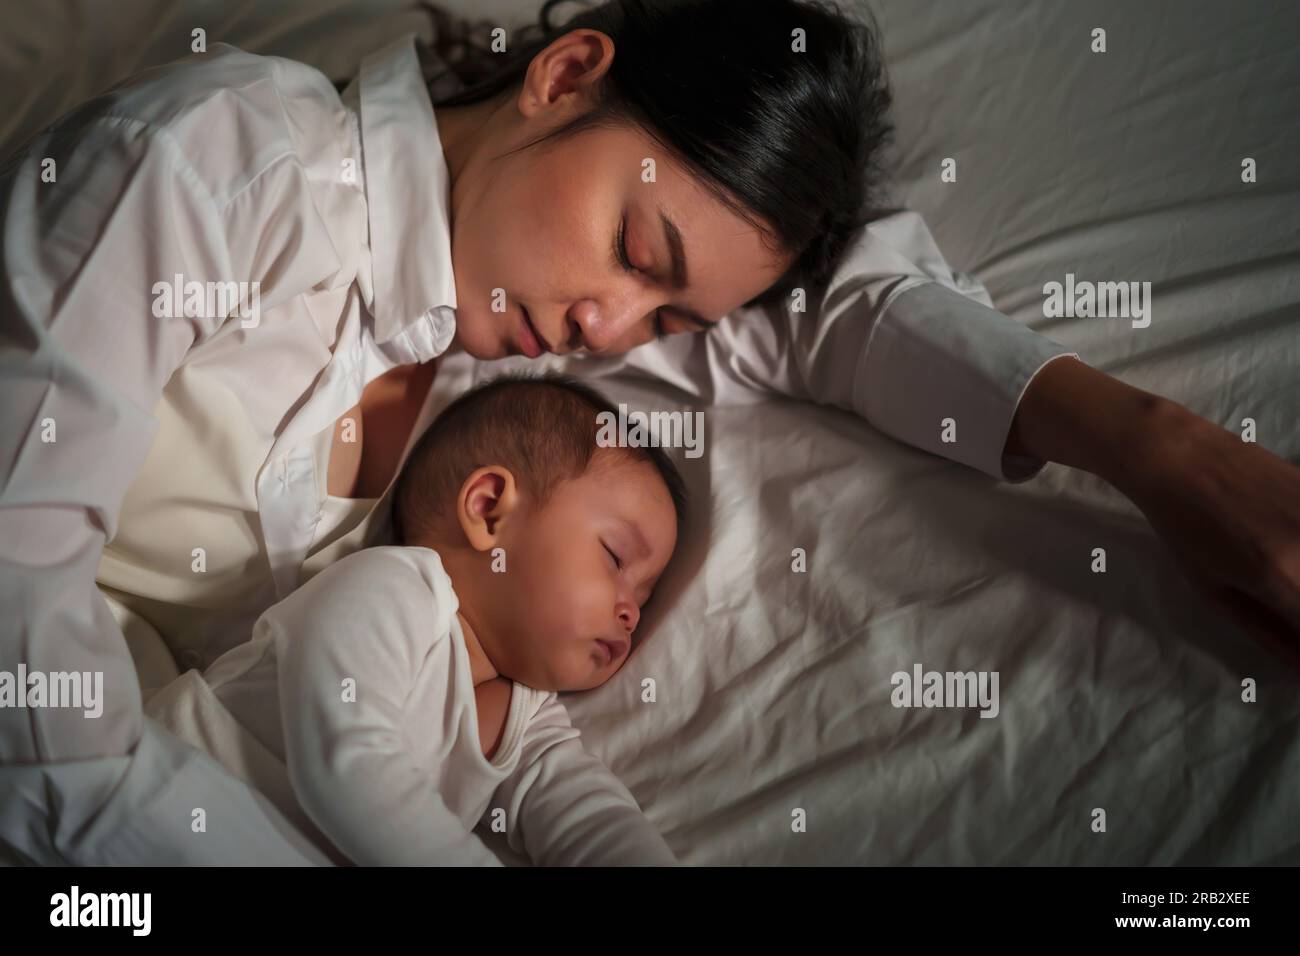 mother embraces the infant baby sleeping together in a bed at night Stock Photo